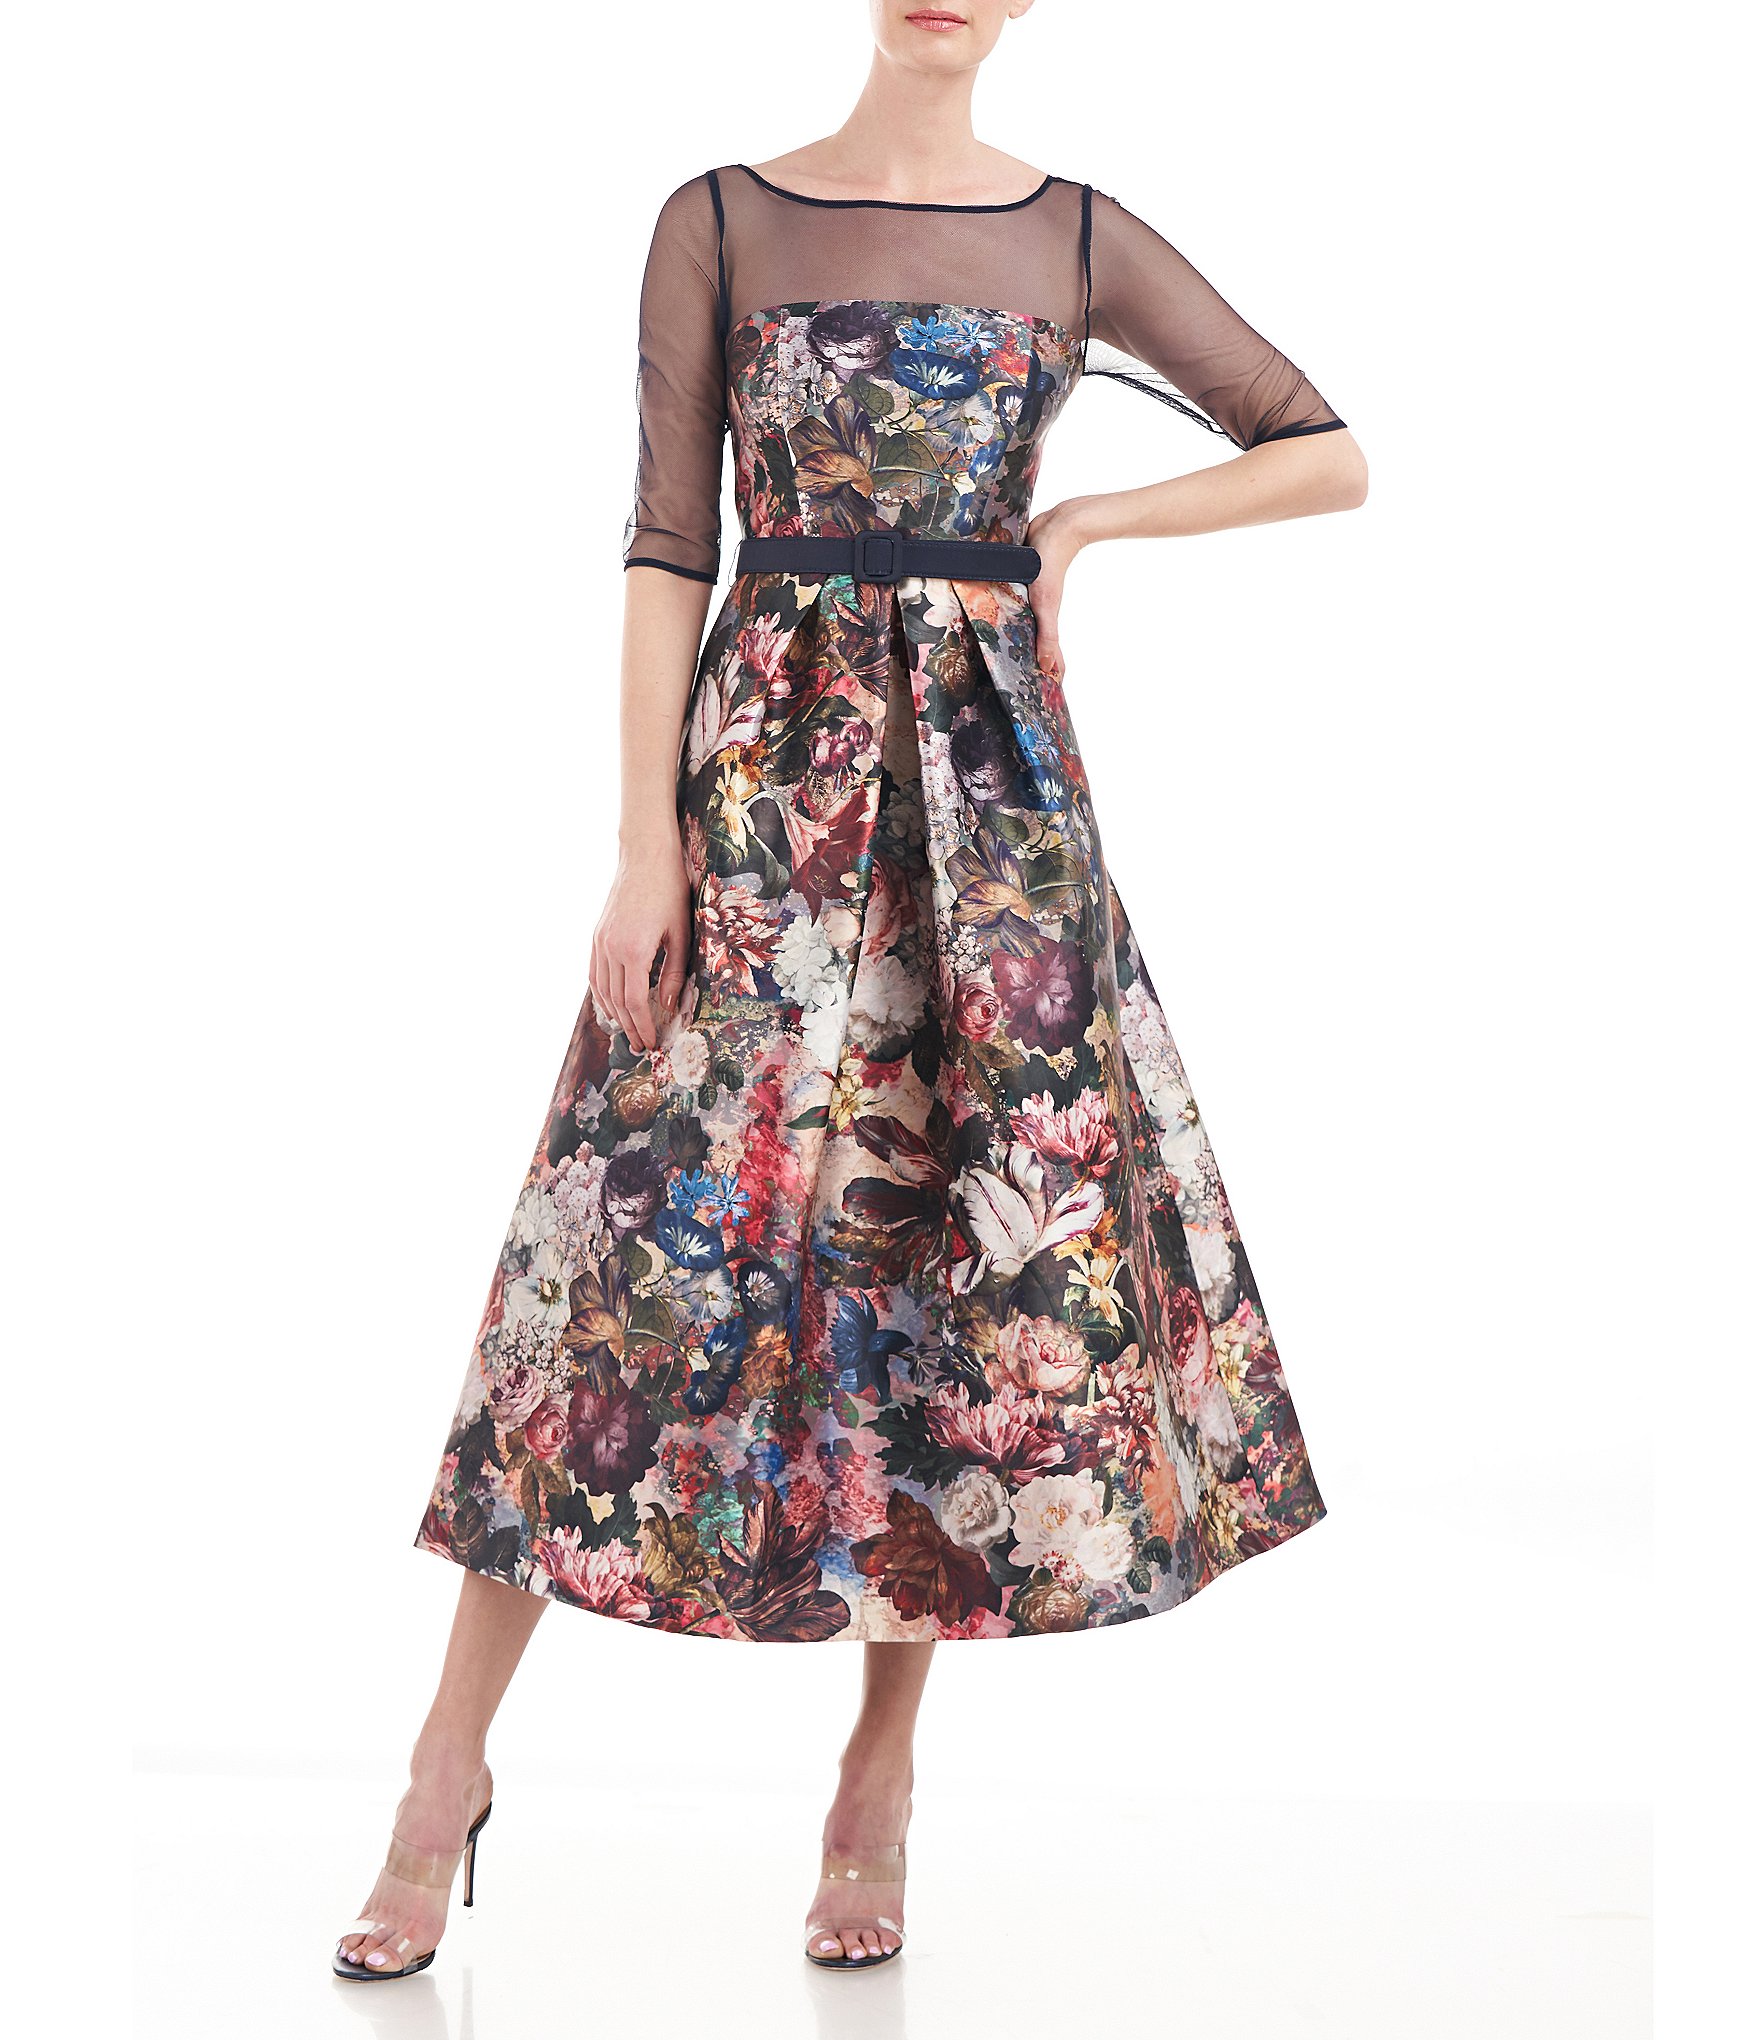 Kay Unger Metallic Floral Print Sleeveless Fit and Flare Tea Length Dress